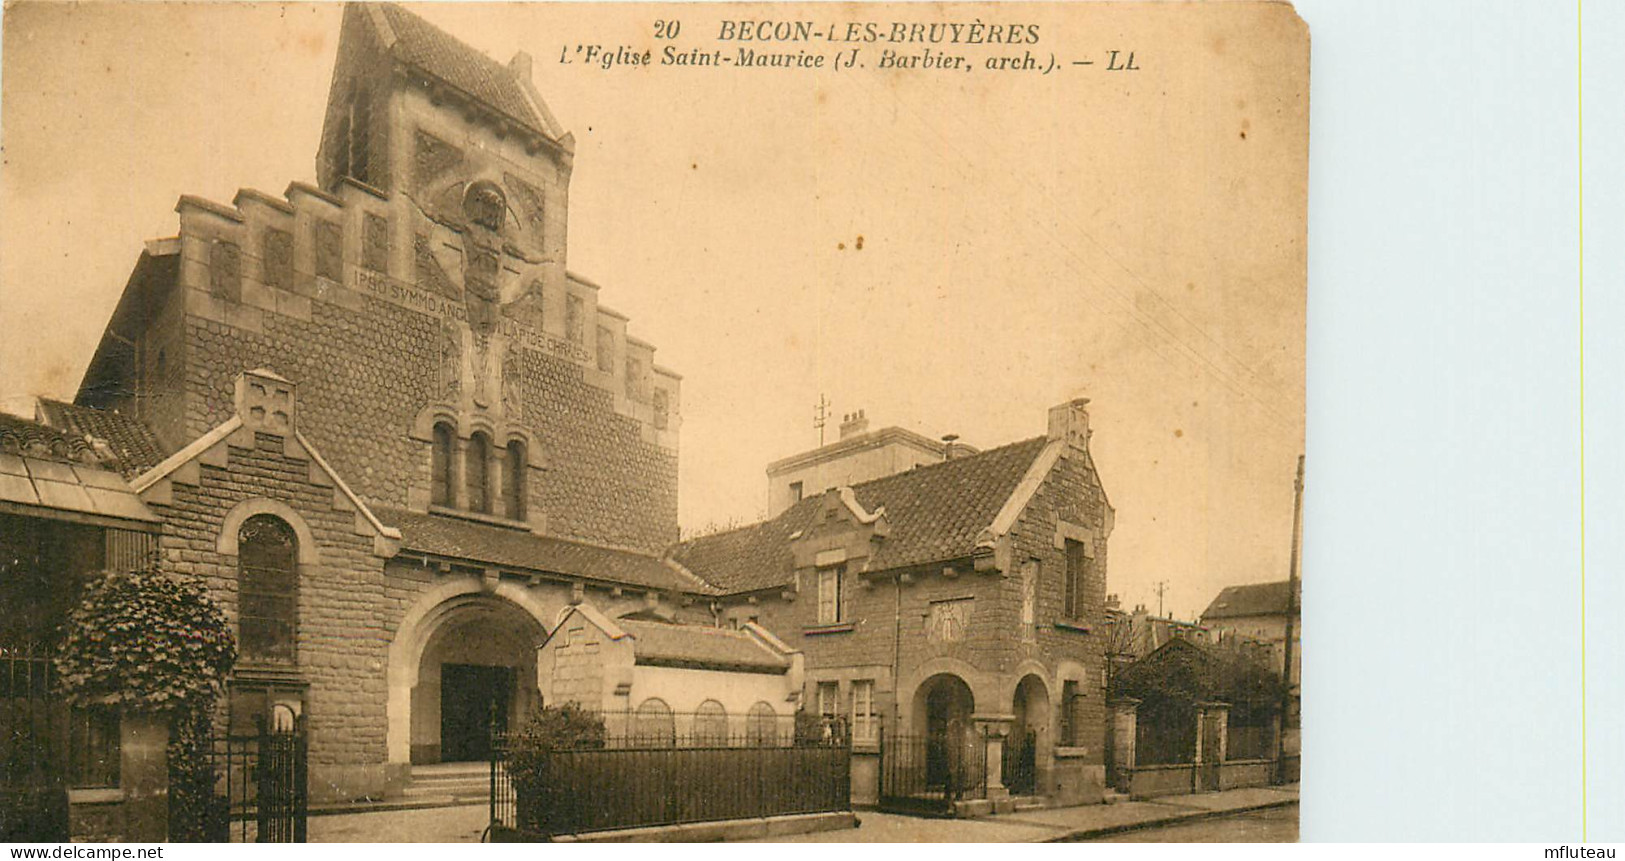 92* COURBEVOIE - BECON LES BRUYERES  Eglise St Maurice      RL10.0303 - Courbevoie